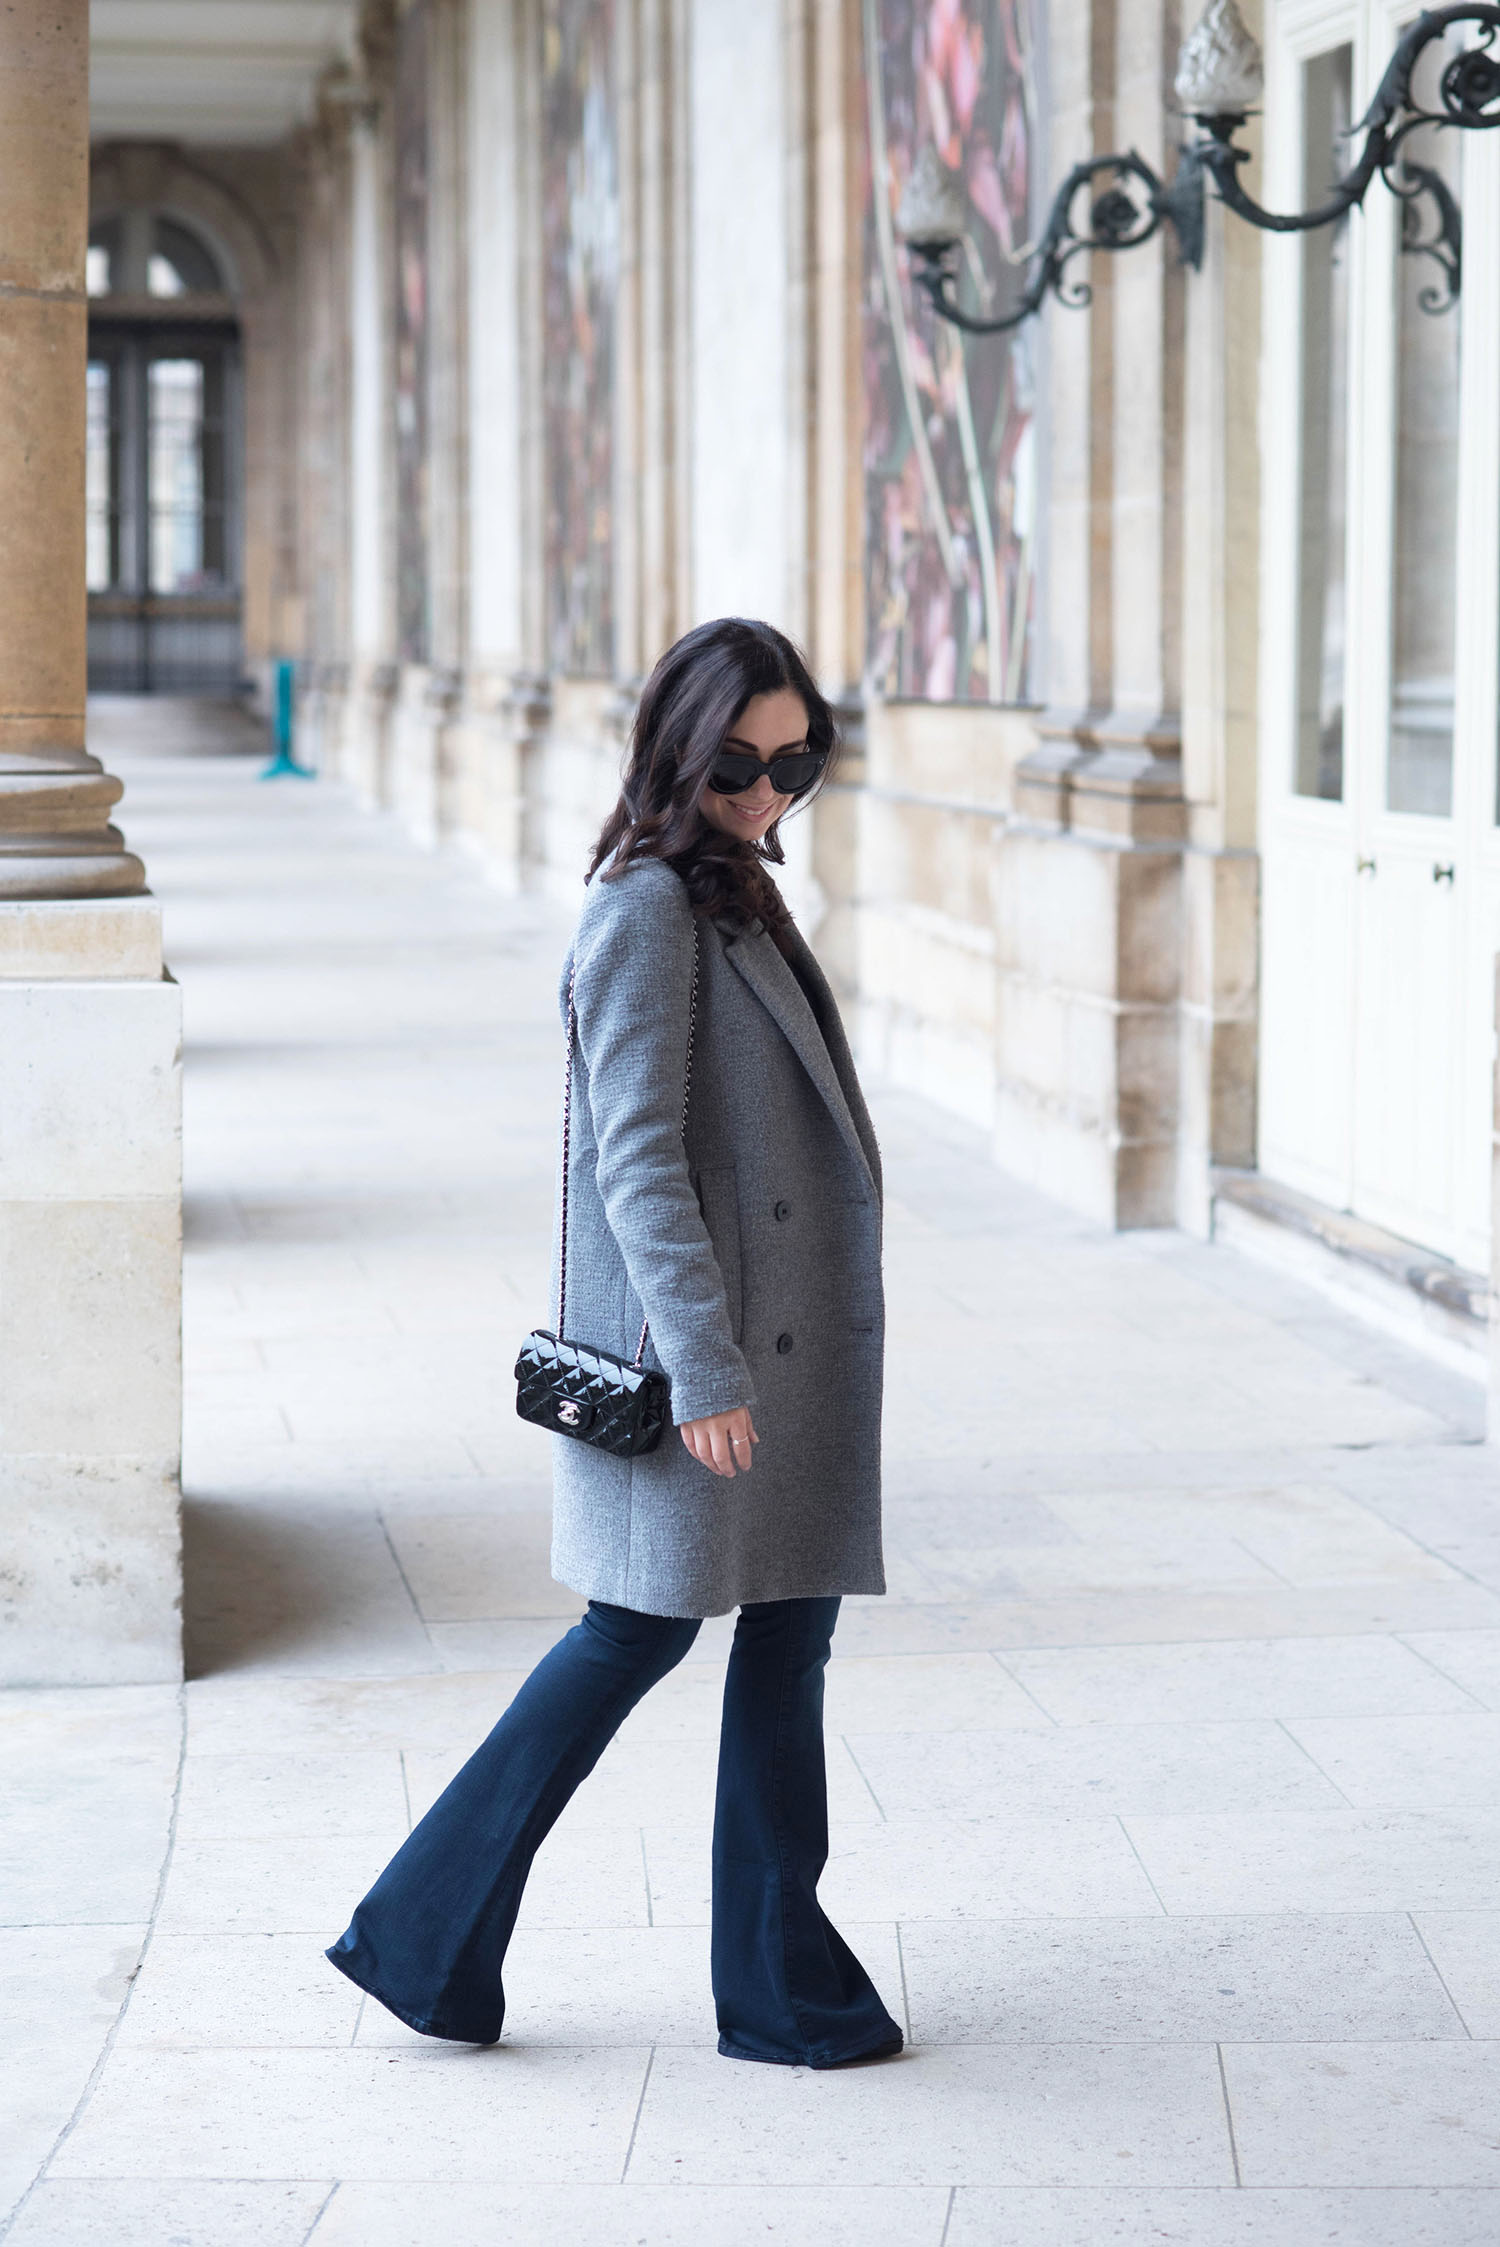 Fashion blogger Cee Fardoe of Coco & Vera at the National Archives in Paris, wearing Mavi flared jeans and carrying a Chanel Timeless handbag